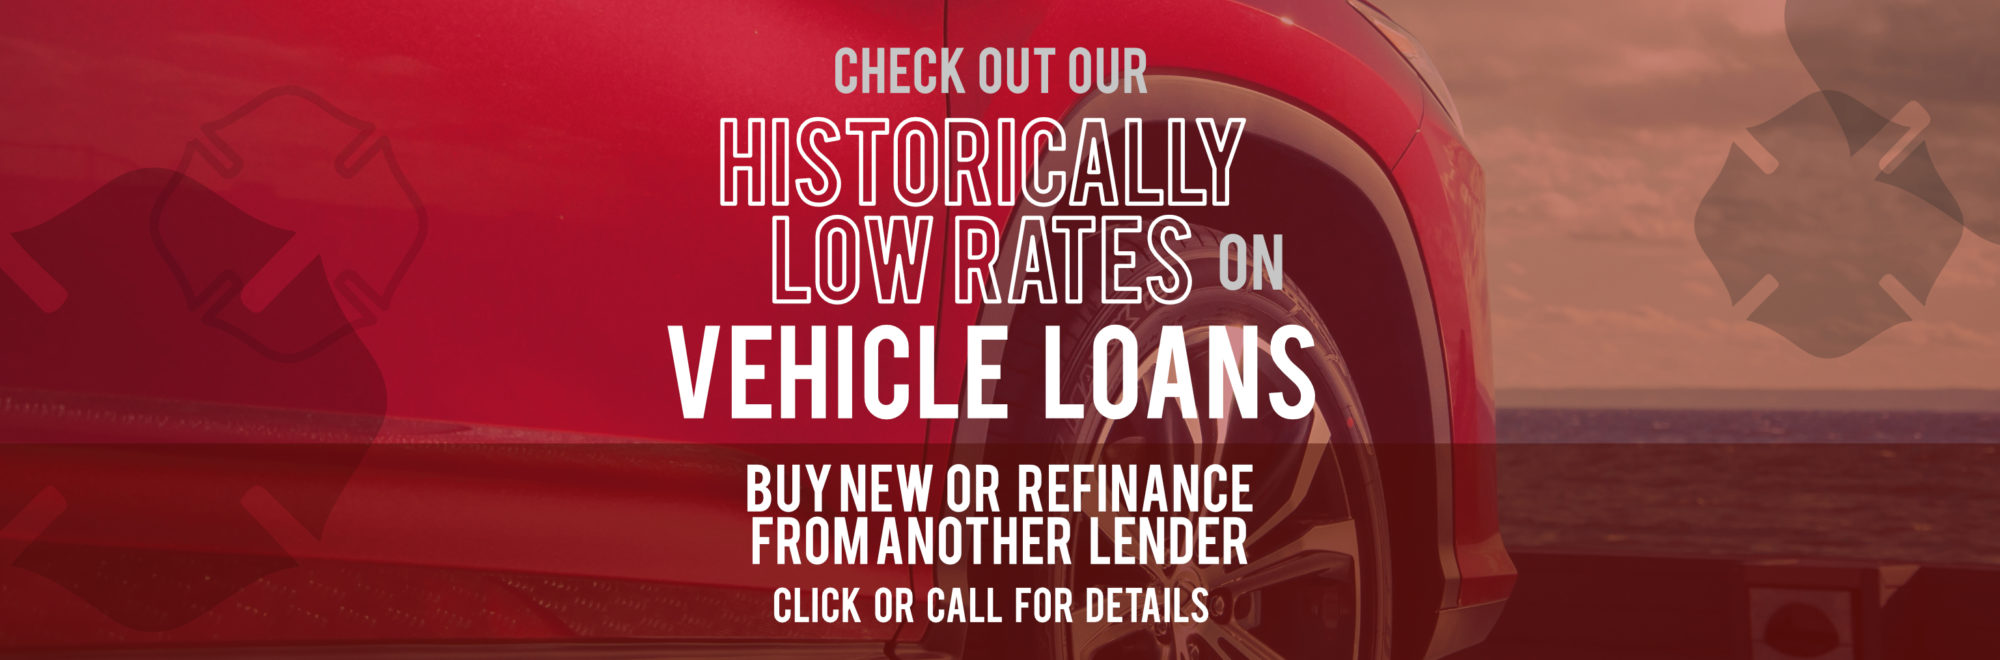 Check Out Our Historically Low Rates on Vehicle Loans